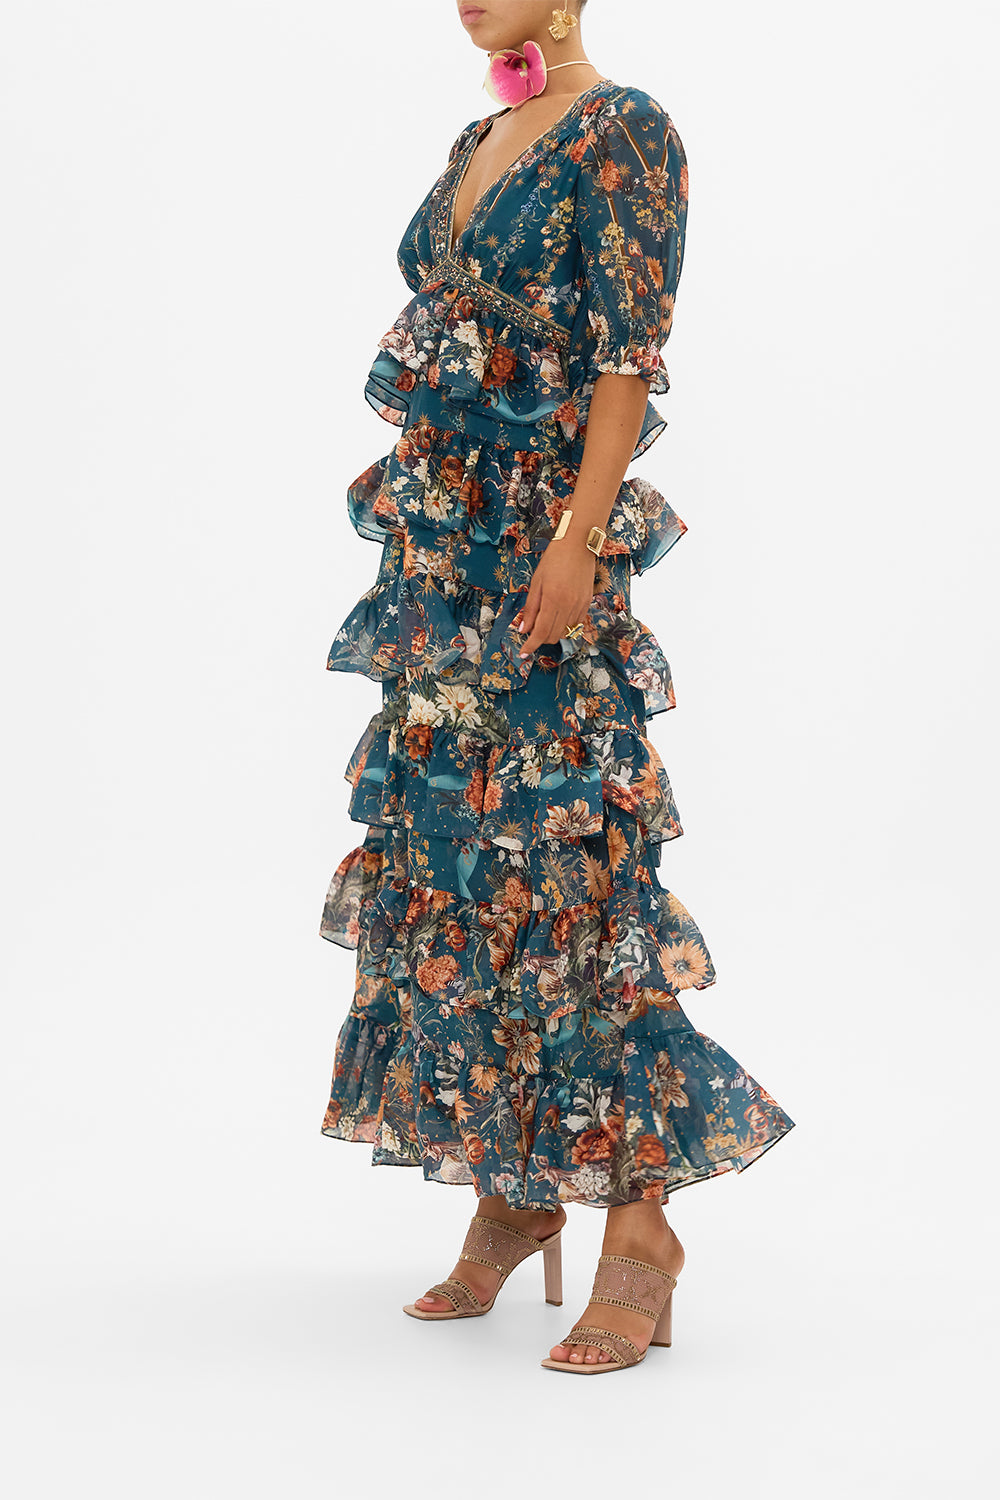 CAMILLA puff sleeve maxi dress in She Who Wears The Crown print